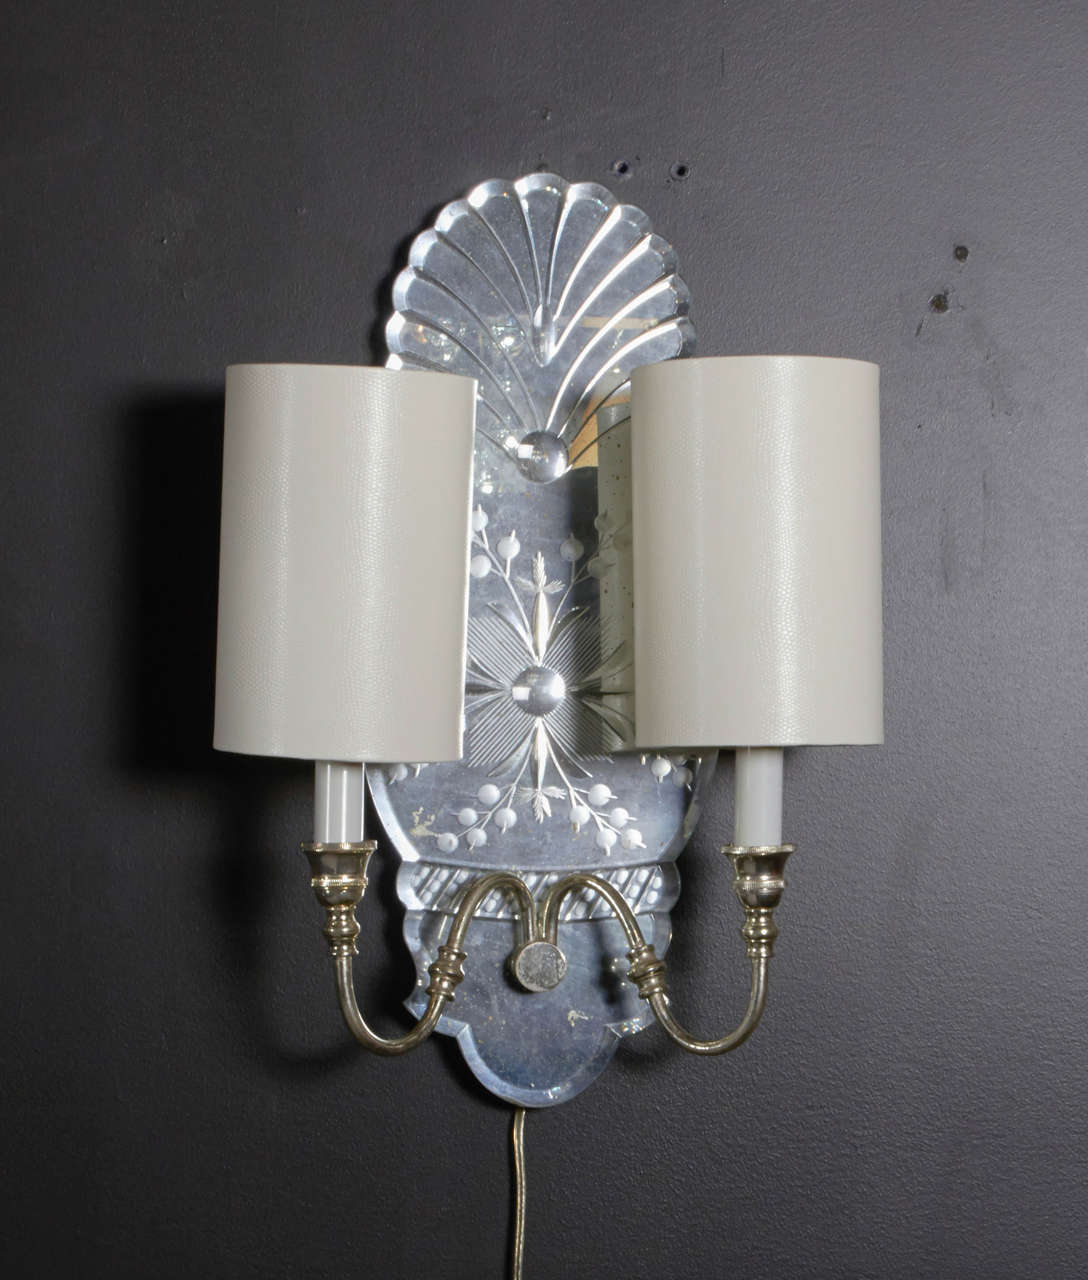 These elegant sconces are designed with a beautiful scalloped form. Intricate reverse etching design throughout, including hand beveled borders. Additional gold fleck details and S-shaped nickeled arms. Includes four custom ivory shades with tall